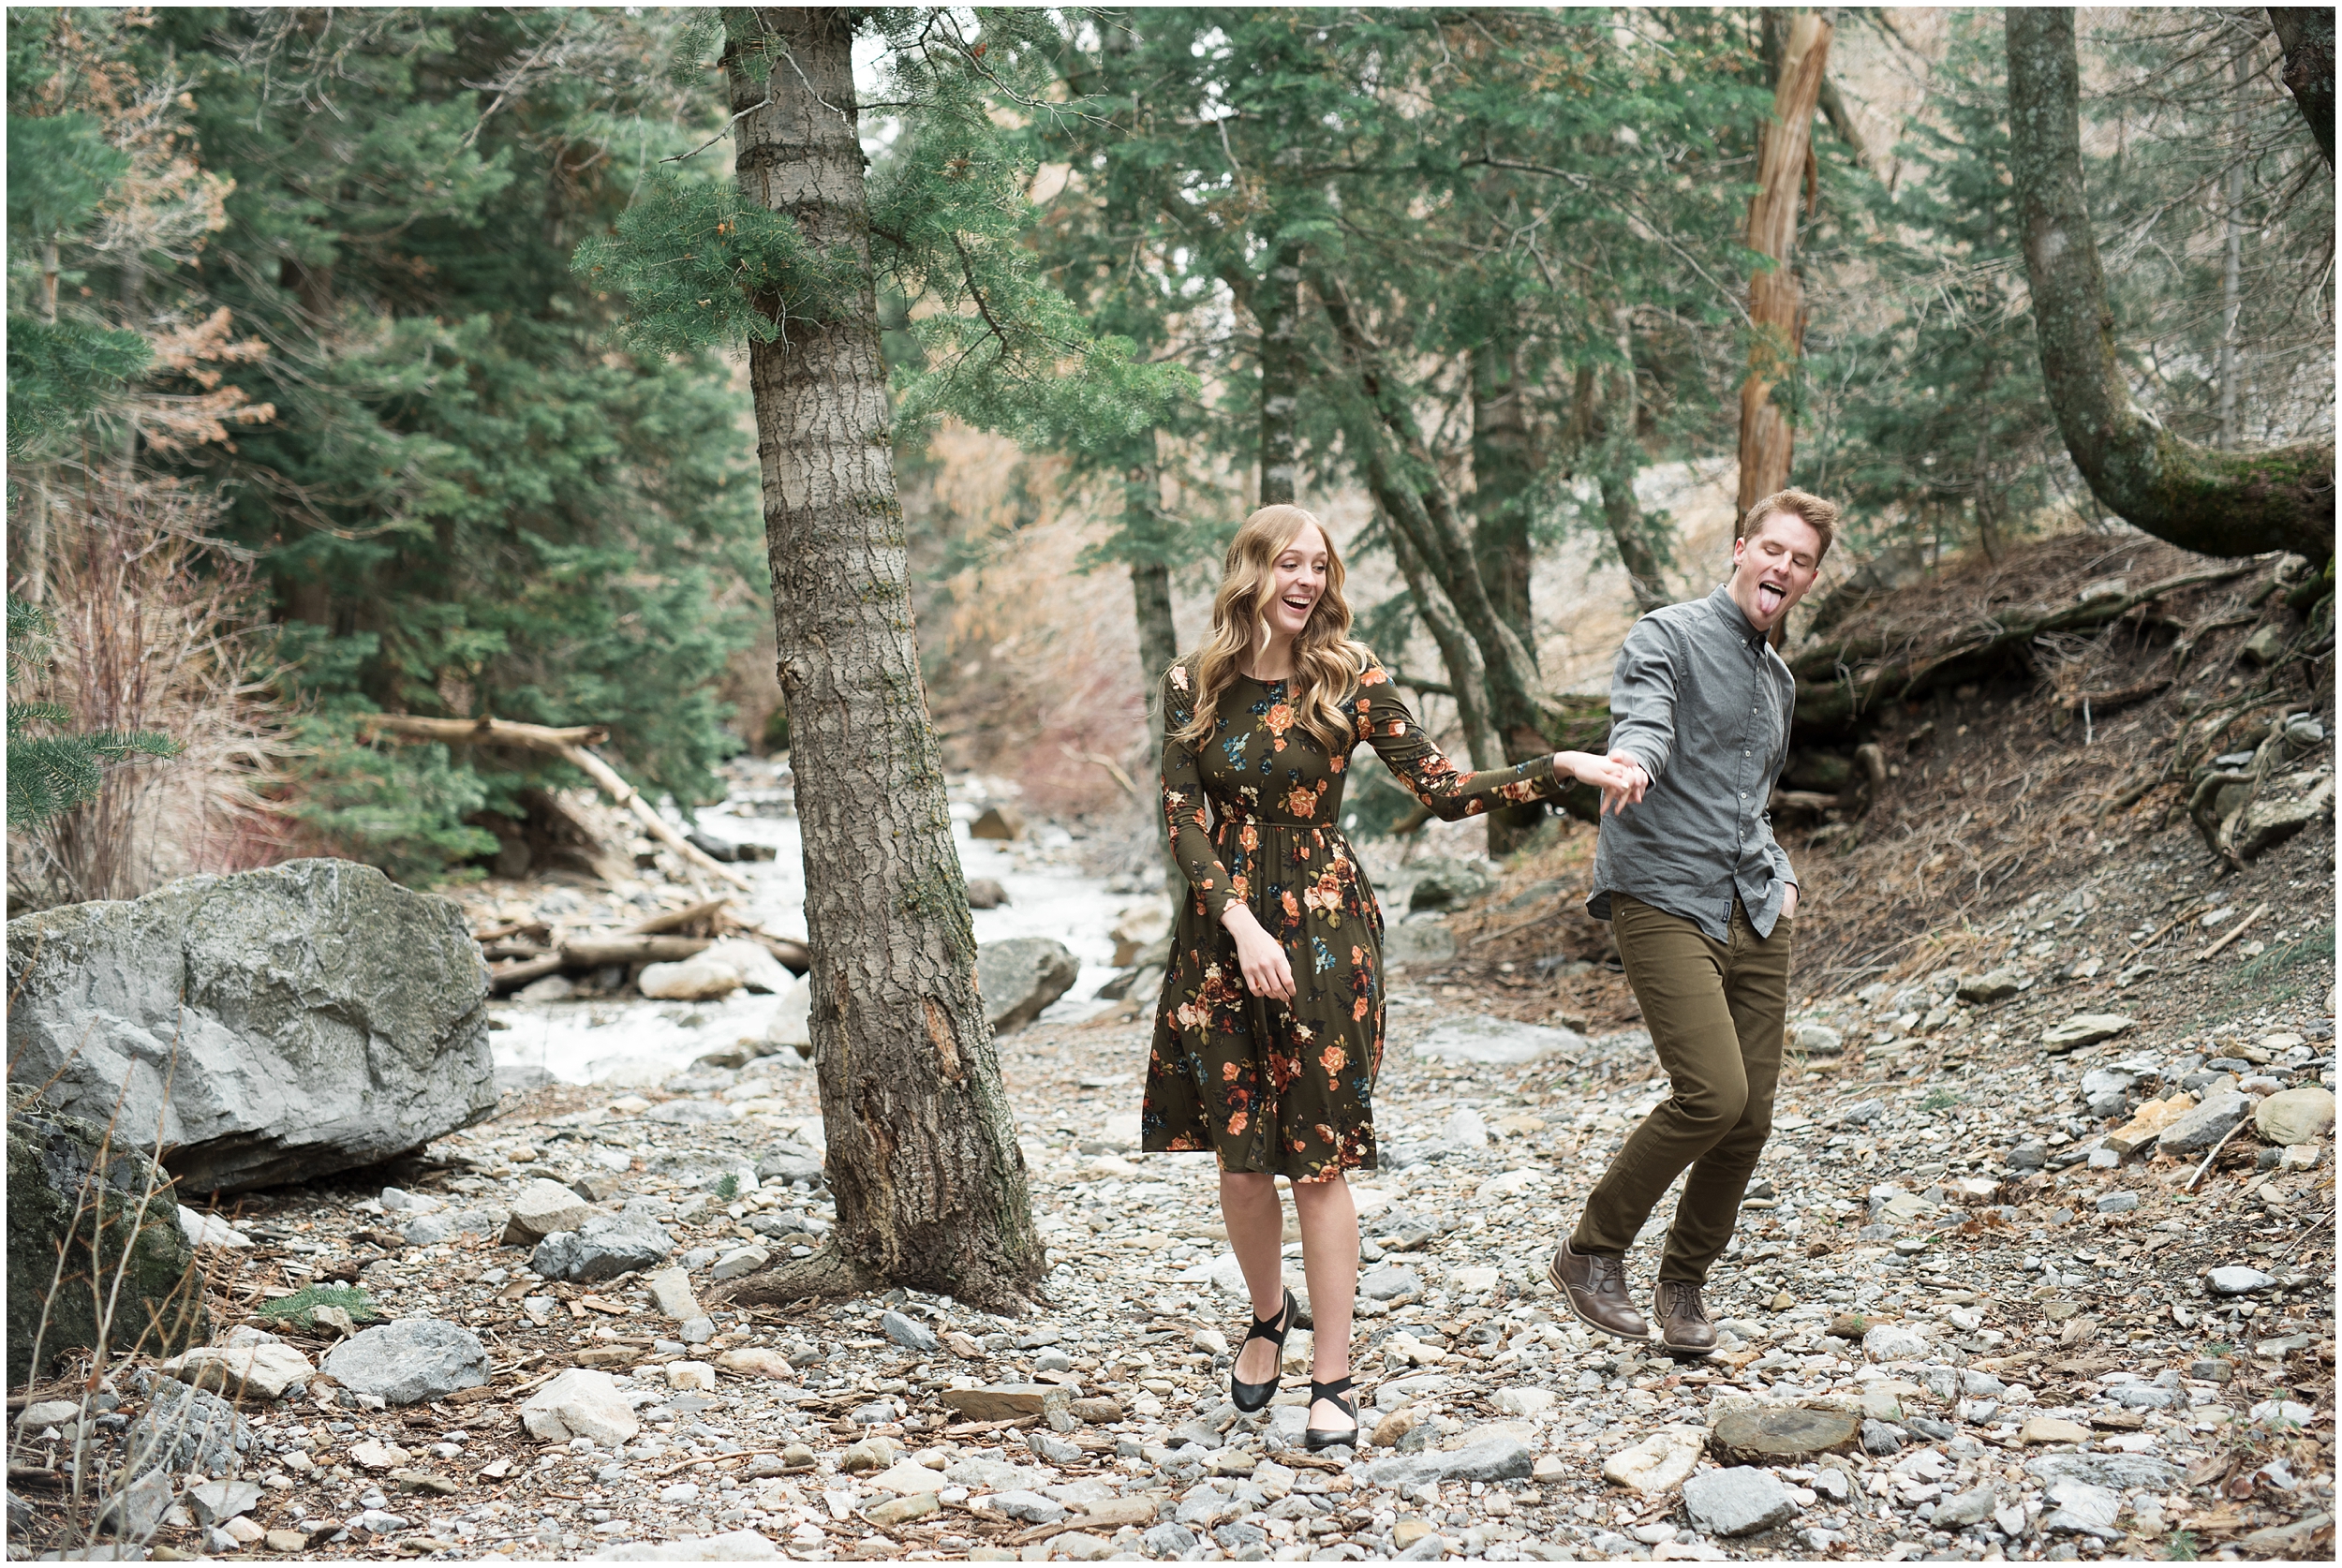 Outdoor engagements, Utah outdoor engagements, engagements with river, olive engagement dress, mountainside engagements, forest engagements, Utah wedding photographer, Utah wedding photography, Utah county wedding photography, Utah county wedding photographer, salt lake city photographers, salt lake city wedding photography, salt lake photographers, salt lake city photographers, photographers in Utah, Utah photography, photography Utah, photographer Utah, Kristina Curtis photography, Kristina Curtis Photographer, www.kristinacurtisphotography.com